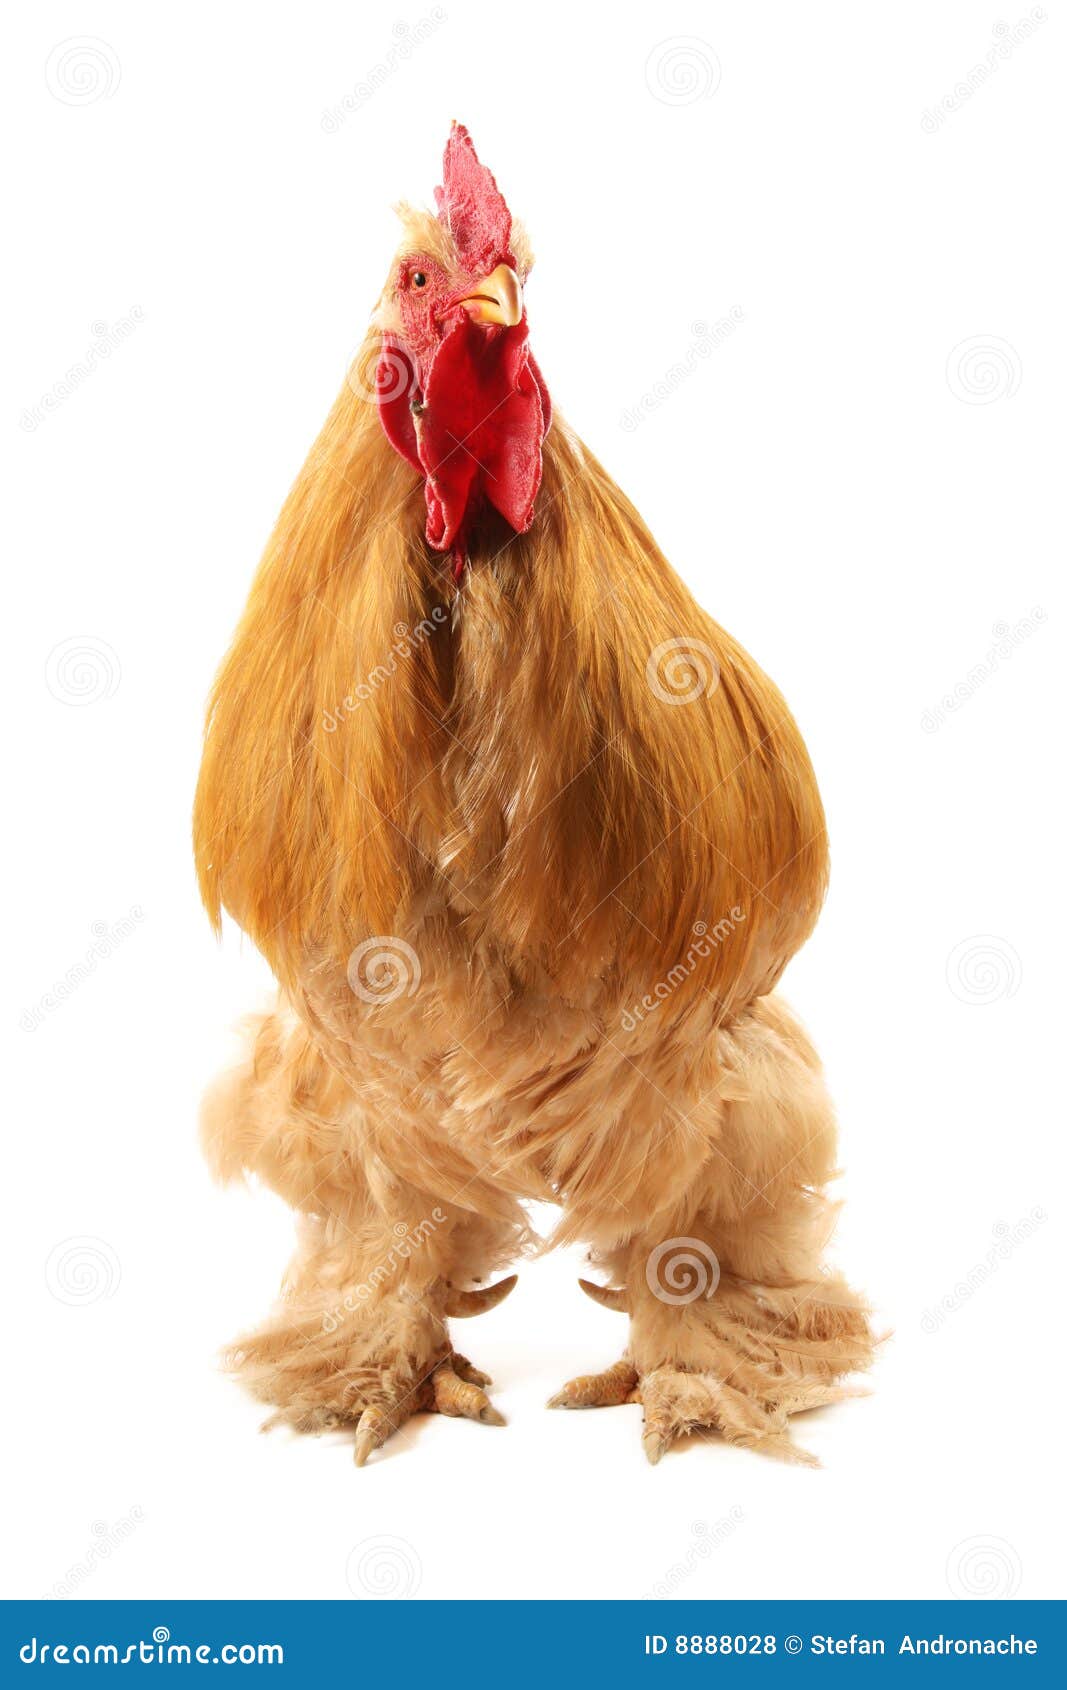 buff cochin rooster